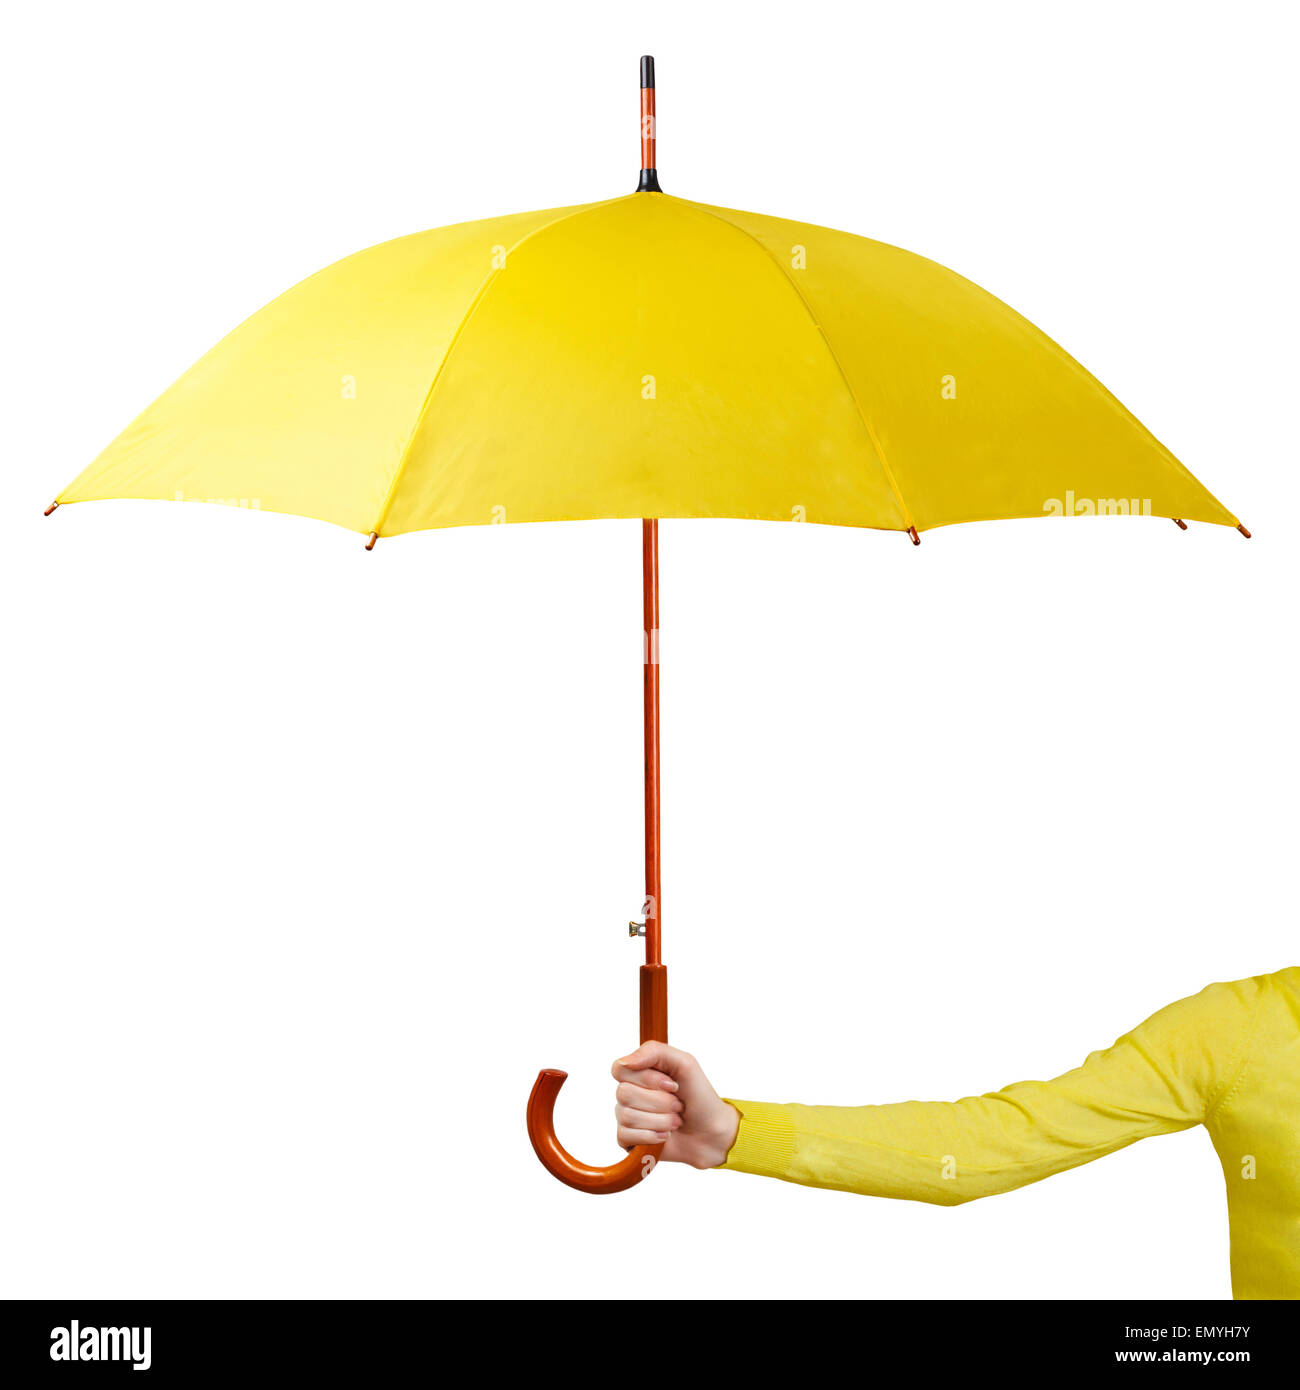 Hand holding a yellow umbrella isolated on white background Stock Photo